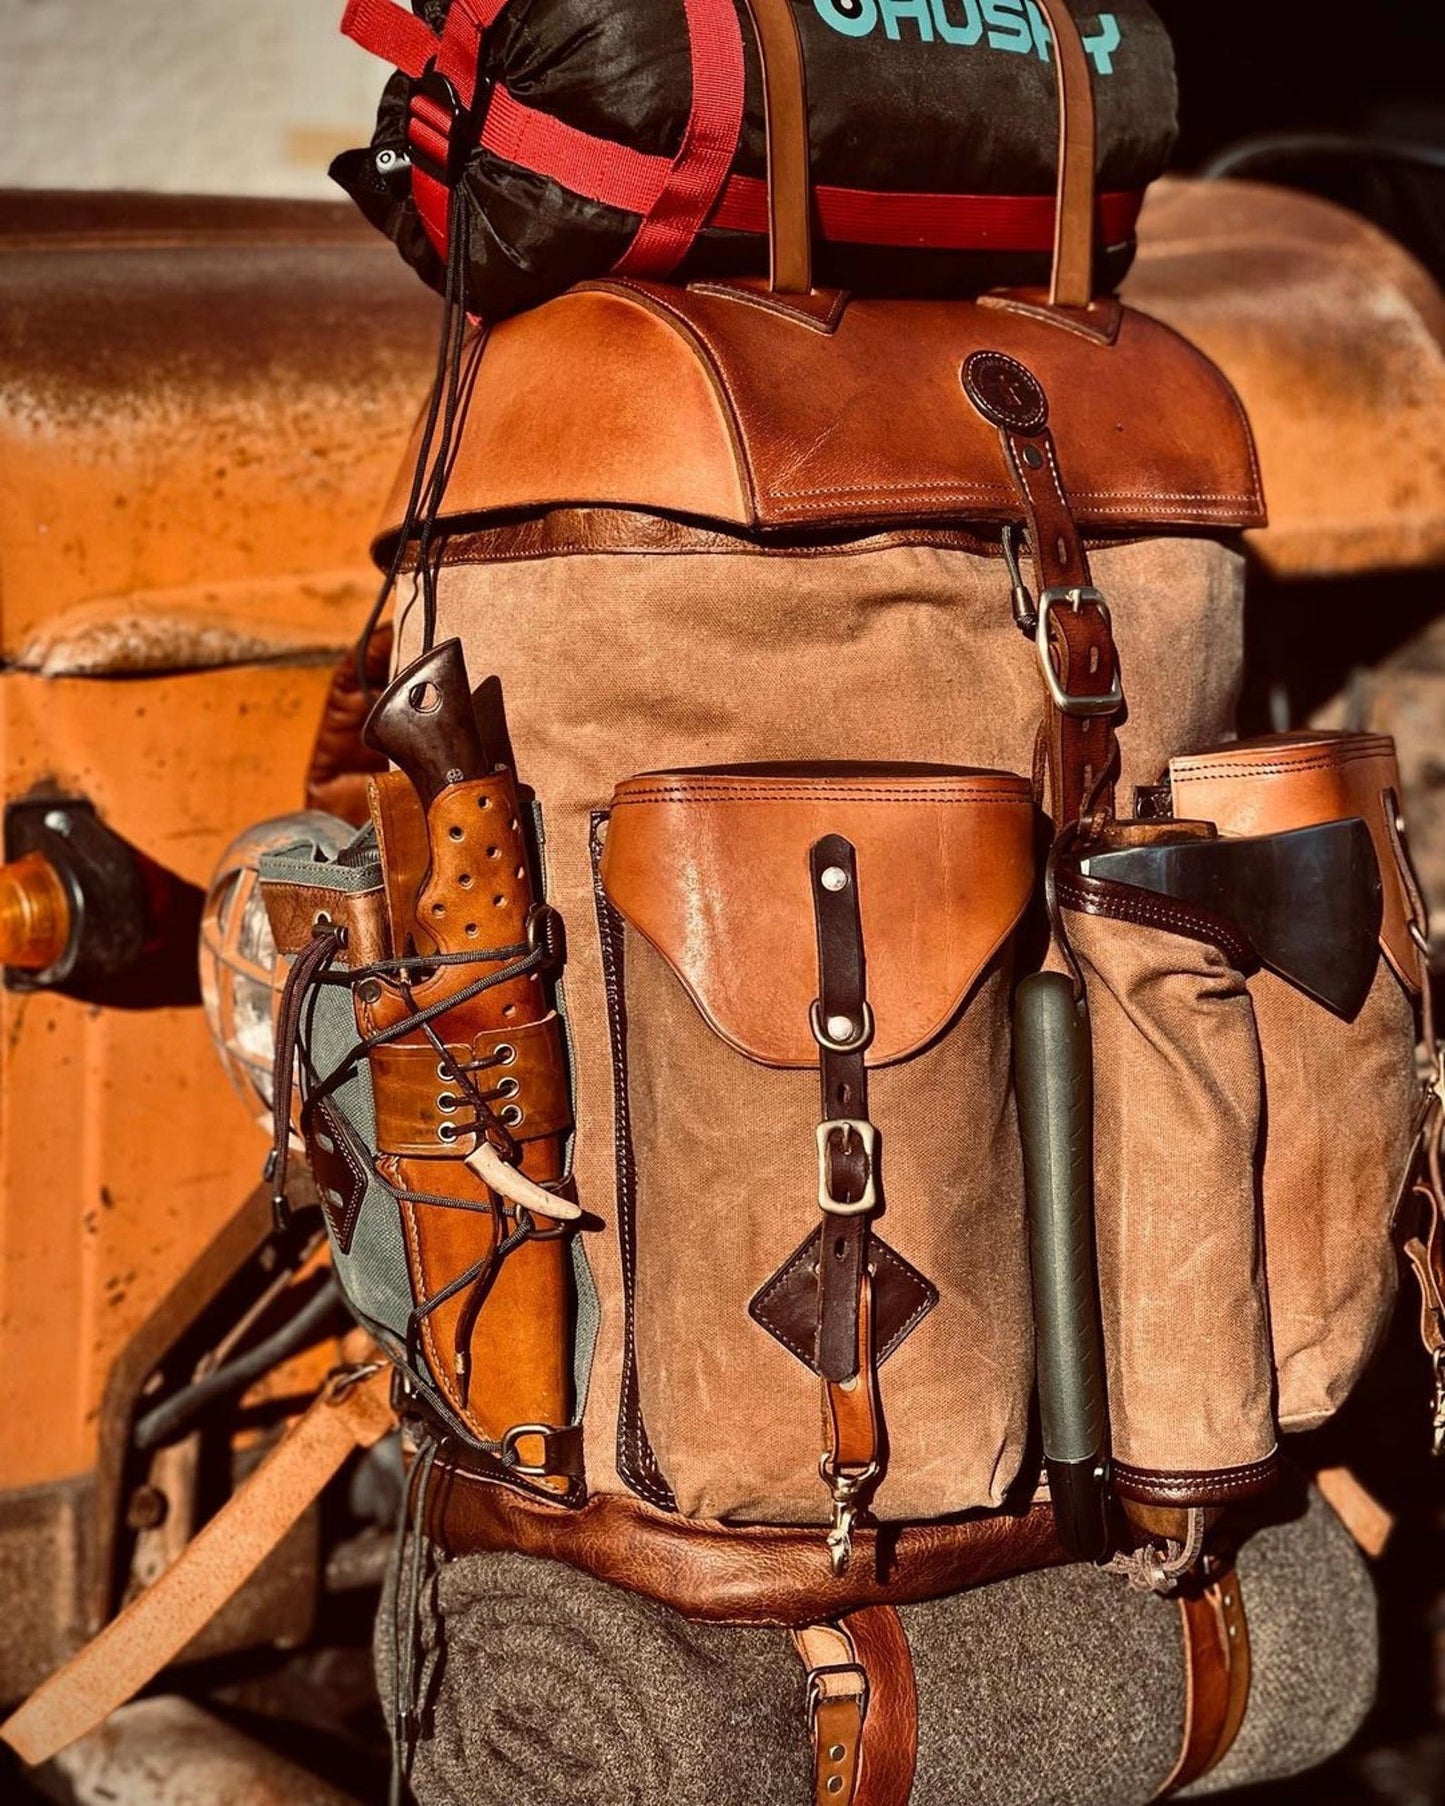 200 USD Discount | Handmade Leather, Waxed Backpack for Travel, Camping, Hunting, Bushcraft, Hiking | 45 Liter | Survival | Personalization bushcraft - camping - hiking backpack 99percenthandmade   